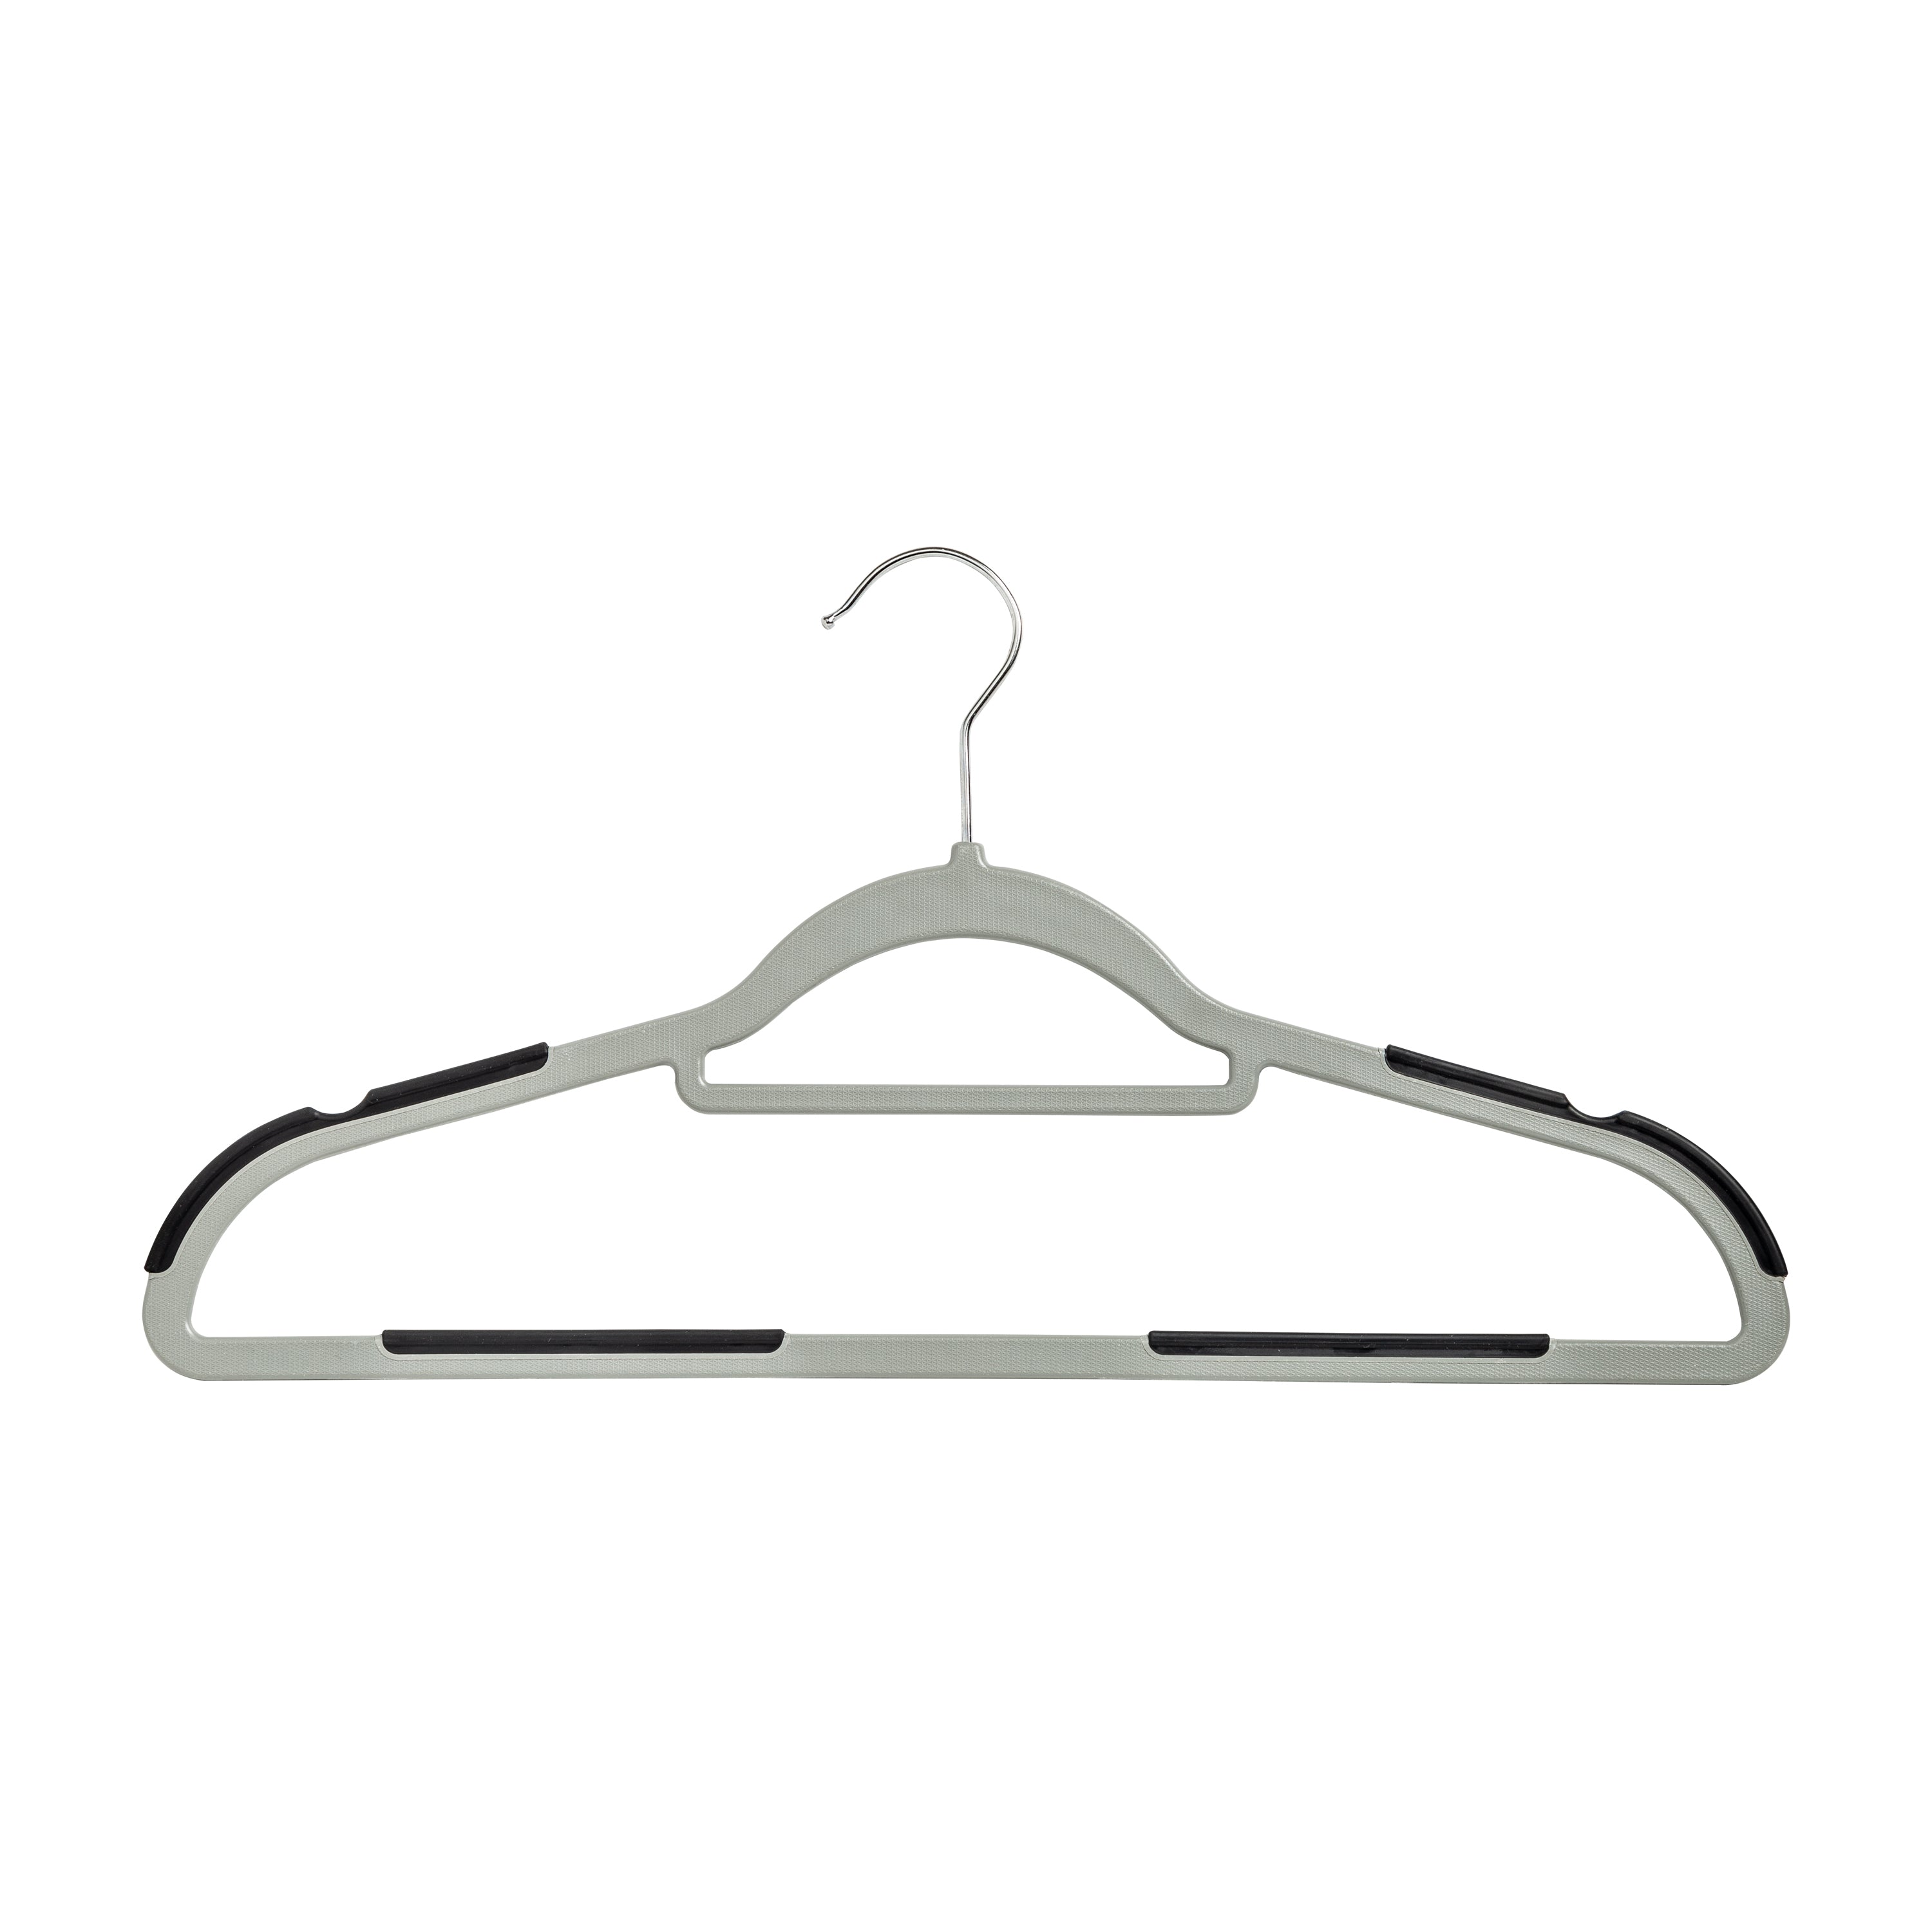 Neaties Plastic Clothes Hangers, 30 Pack, Black, Heavy Duty, Slim, Smooth  Finish, Non-Slip, Prevent Snagging